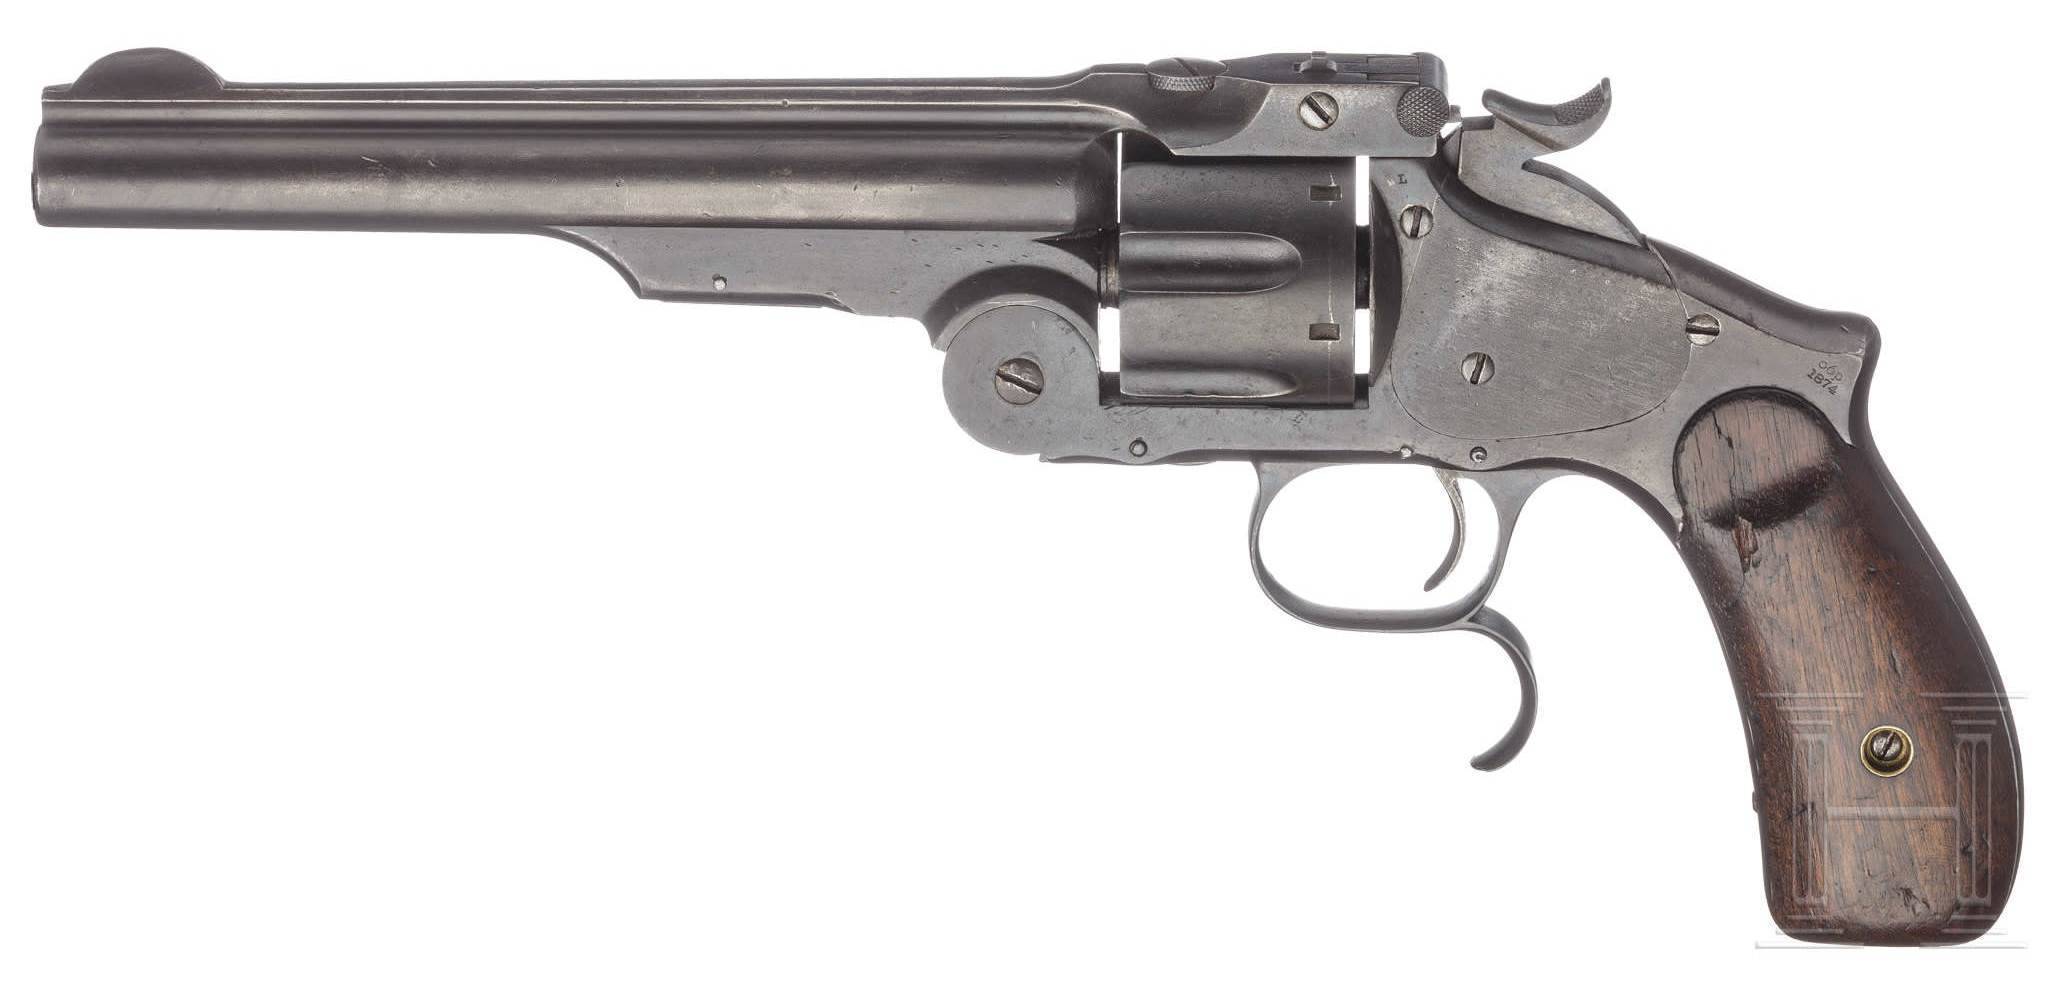 Smith & wesson 5900 pistol series